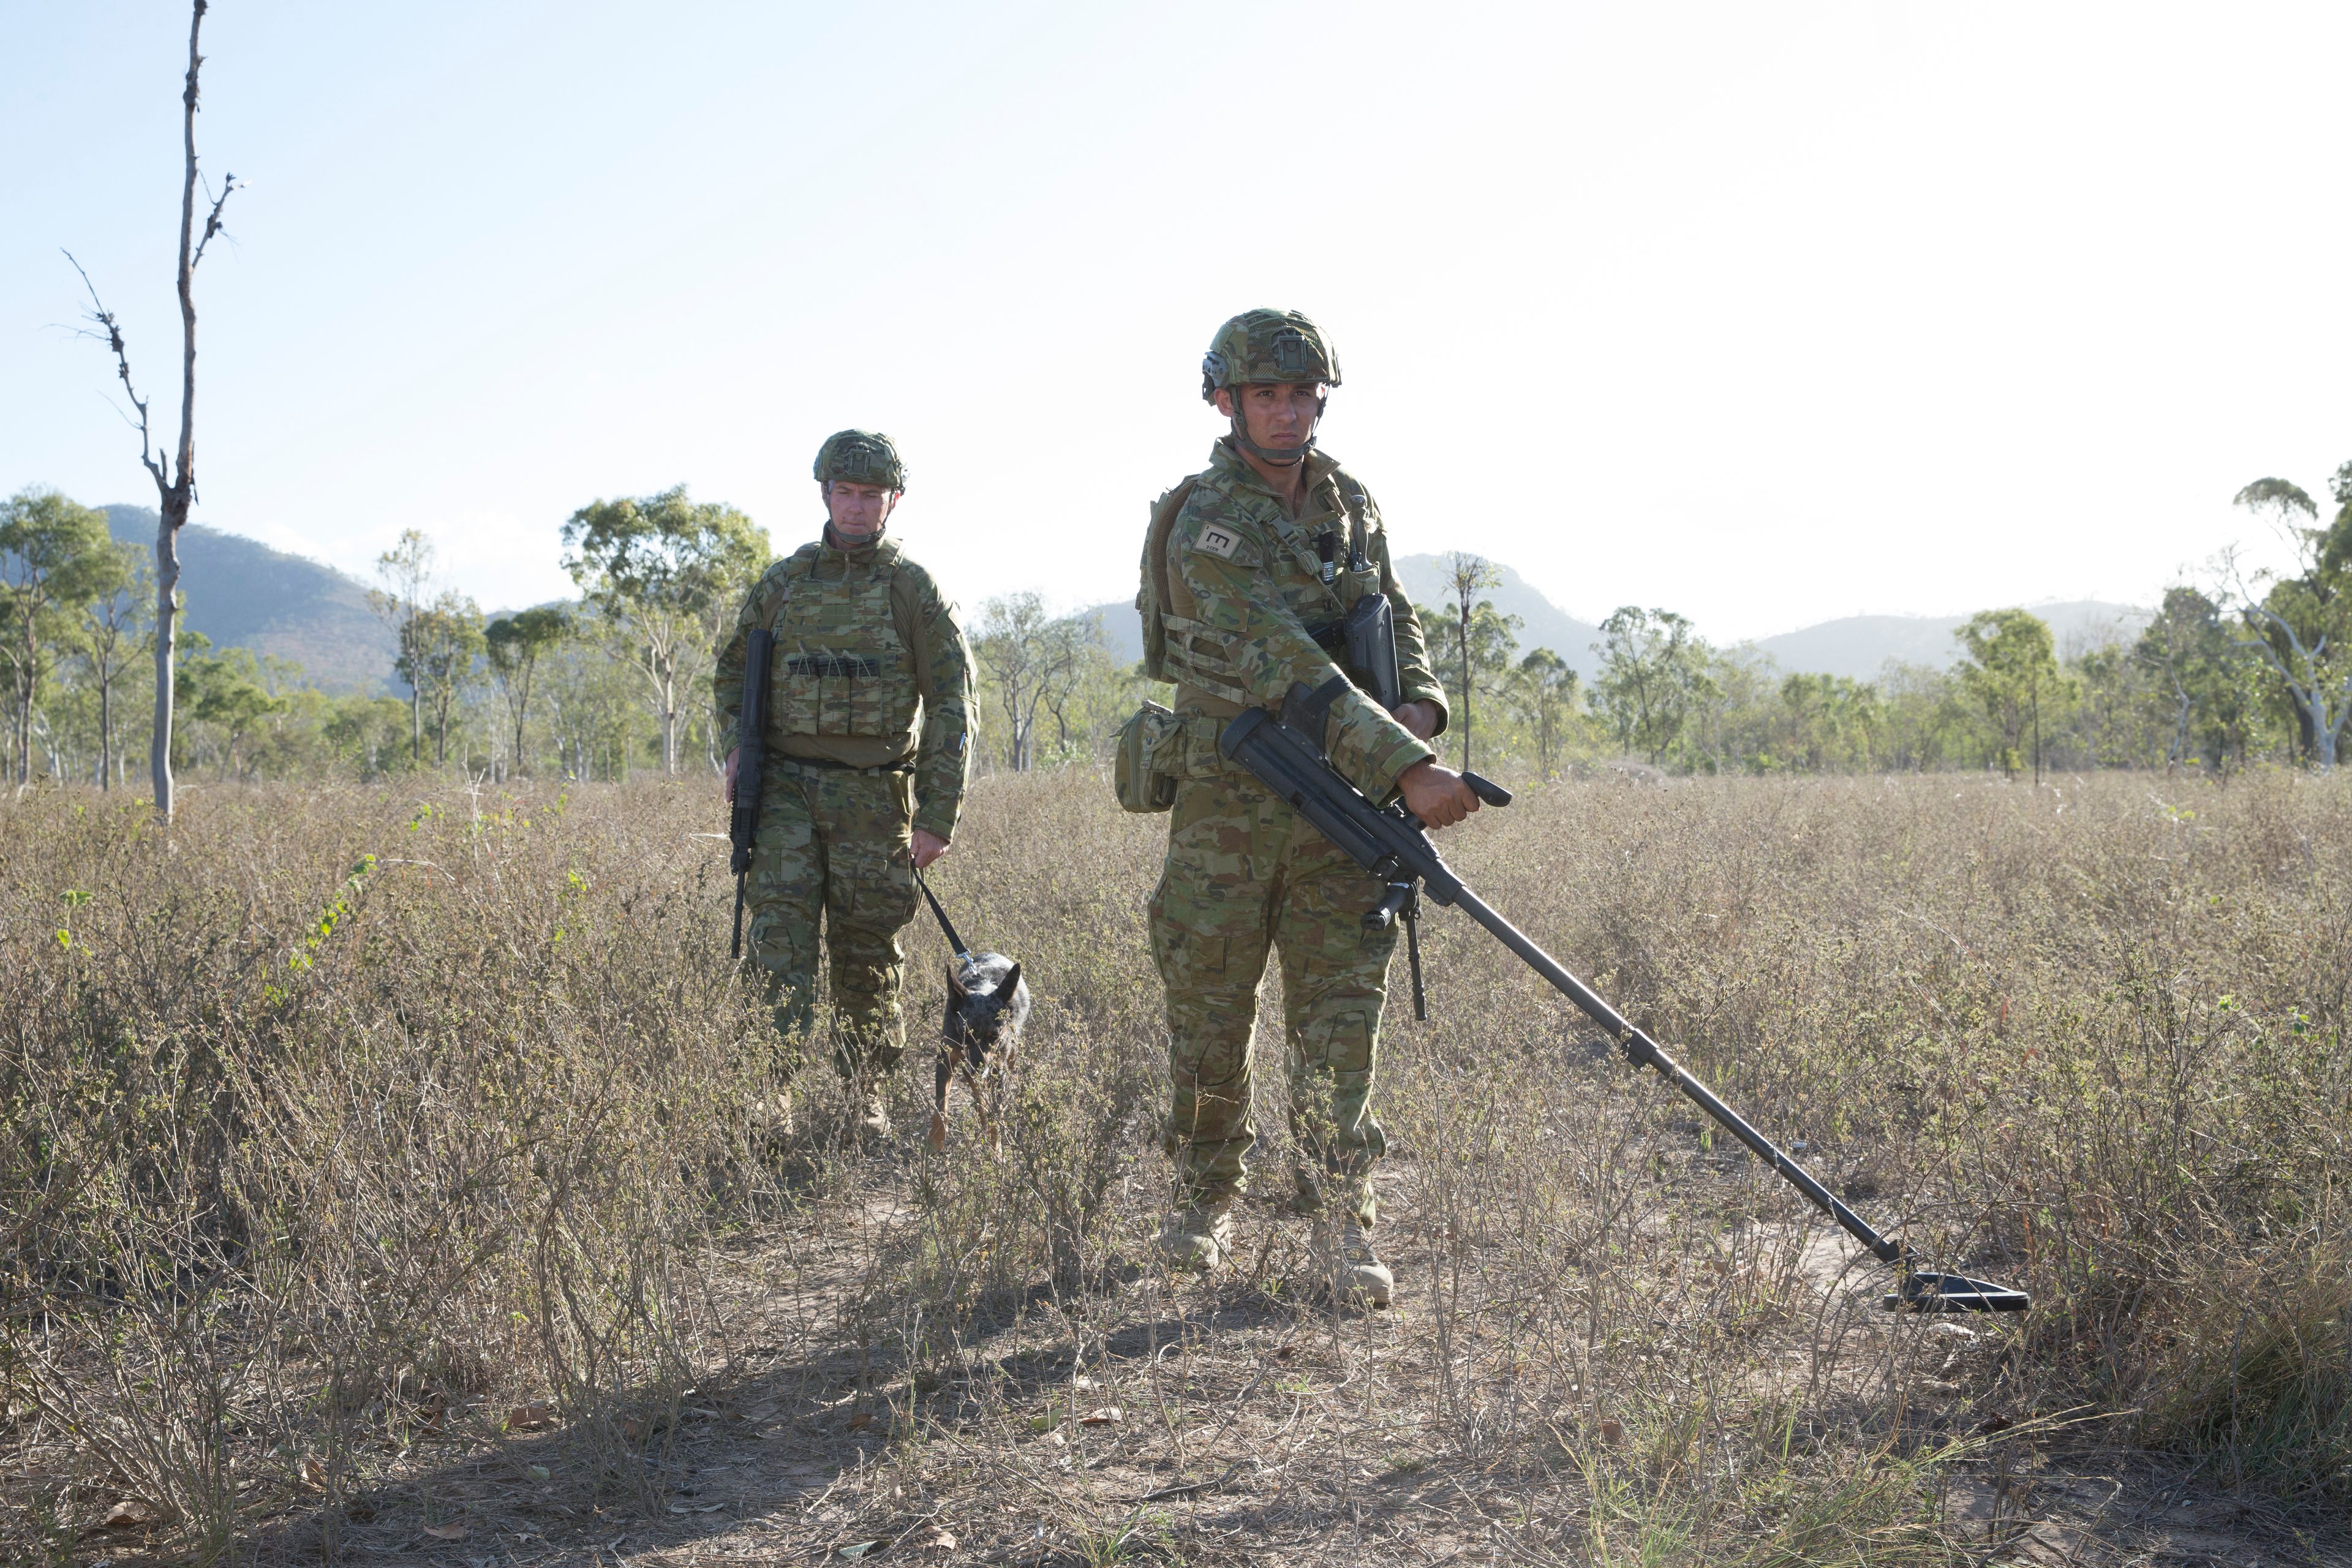 Three Army members work with a dog out in the field.